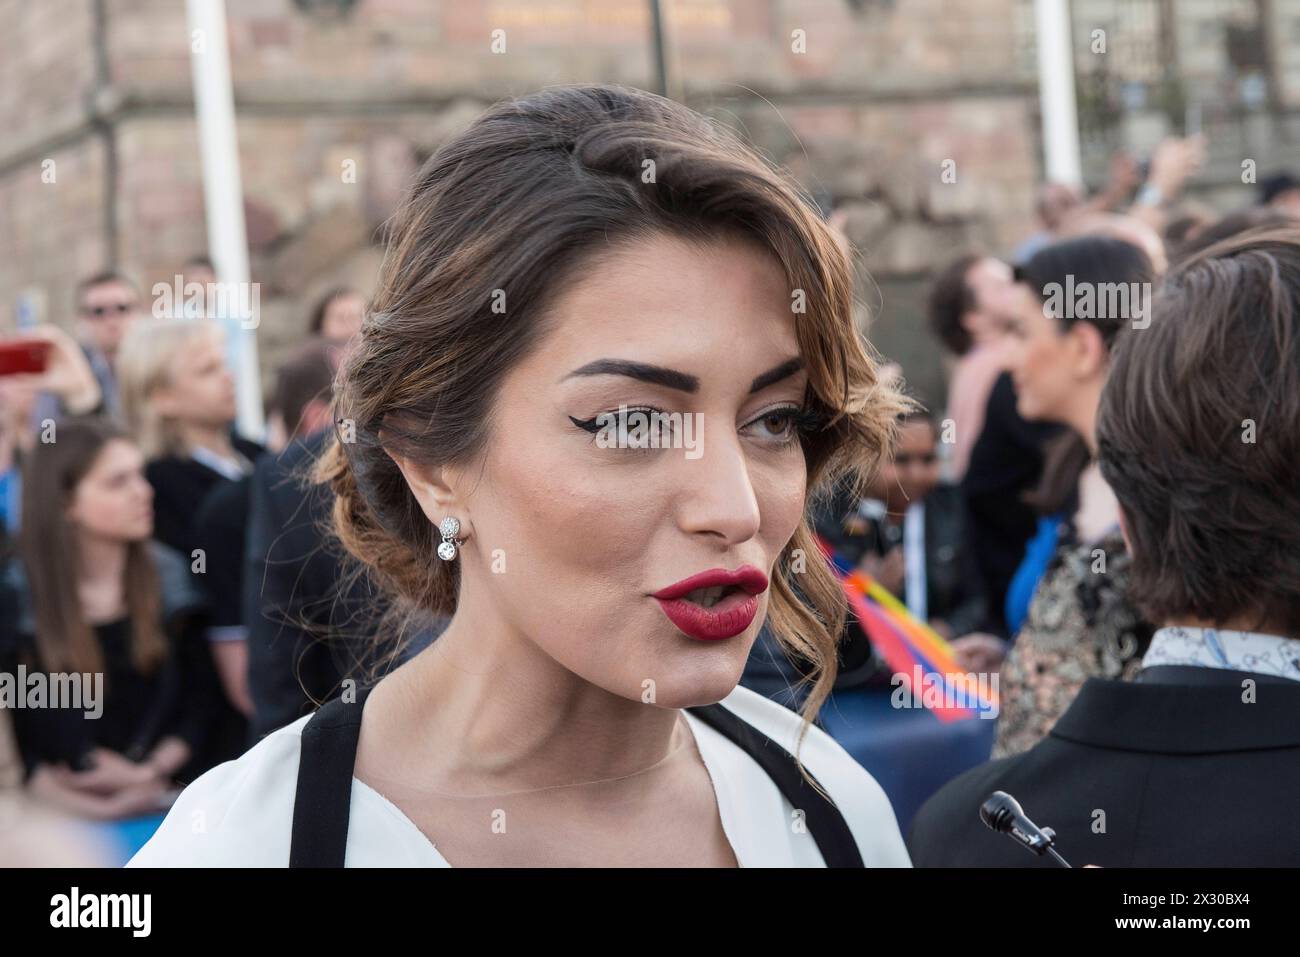 Eurovision Song Contest 2016, Stockholm, Sweden Stockholm, Sweden. 8 May. Iveta Mukuchyan from Armenia on the red carpet for the ESC 2016. Stockholm Euroclub Sweden *** Eurovision Song Contest 2016, Stockholm, Sweden Stockholm, Sweden 8 May Iveta Mukuchyan from Armenia on the red carpet for the ESC 2016 Stockholm Euroclub Sweden Stock Photo